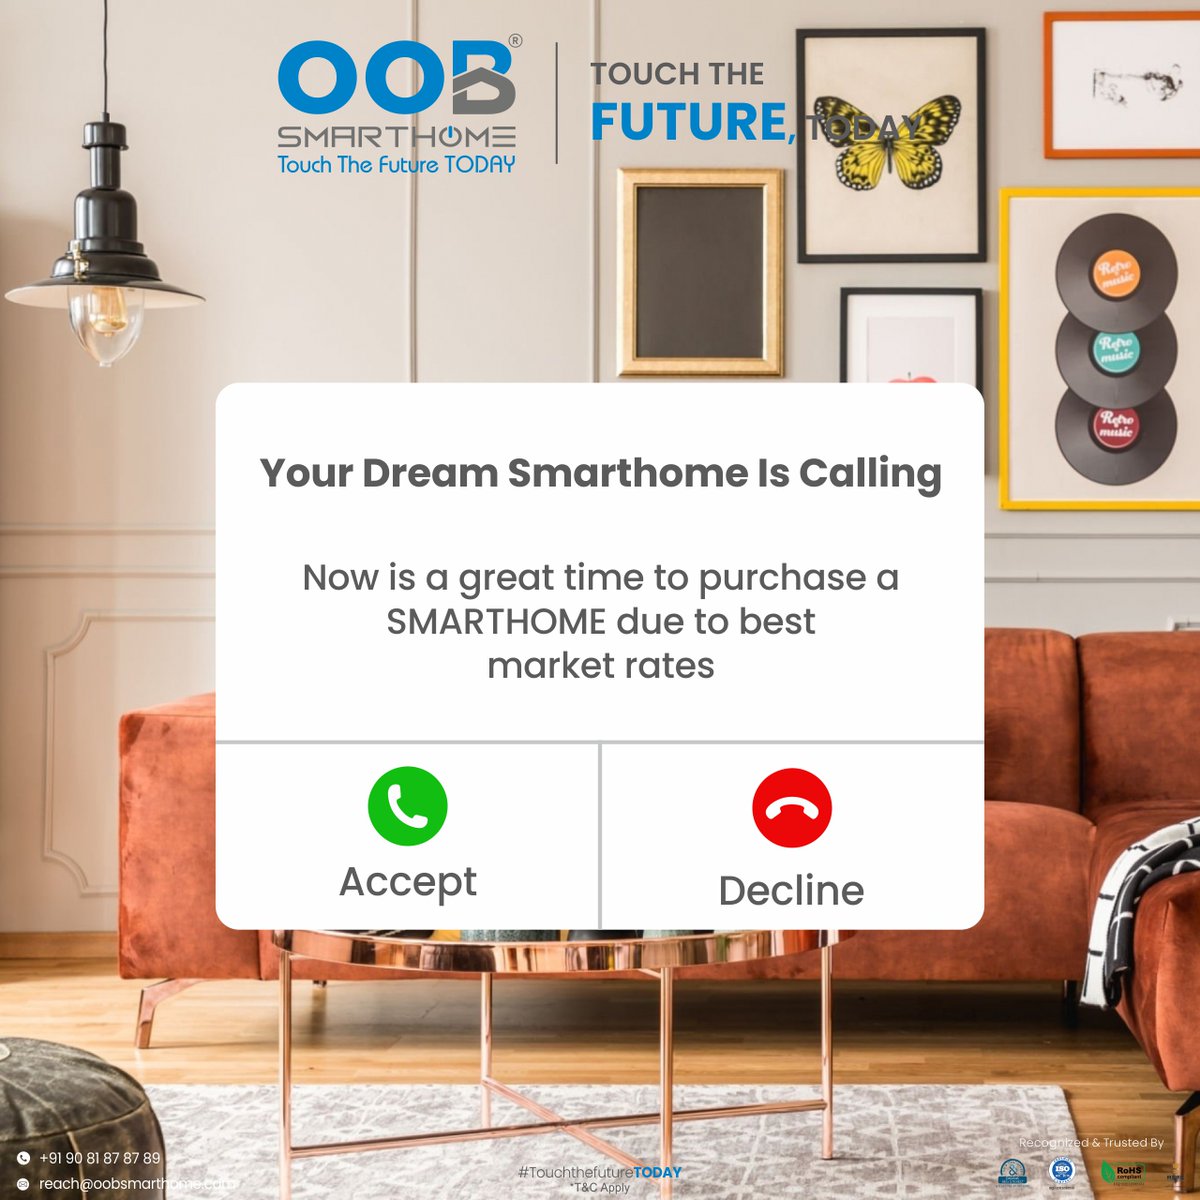 Your dream smart home awaits! Experience the future of living with seamless automation, convenience, and comfort. Get ready to unlock the possibilities of tomorrow, today.

for quick inquiry call on: +91 90 81 87 87 89
.
.
#oobsmarthome #connectedhome #smarttechnology